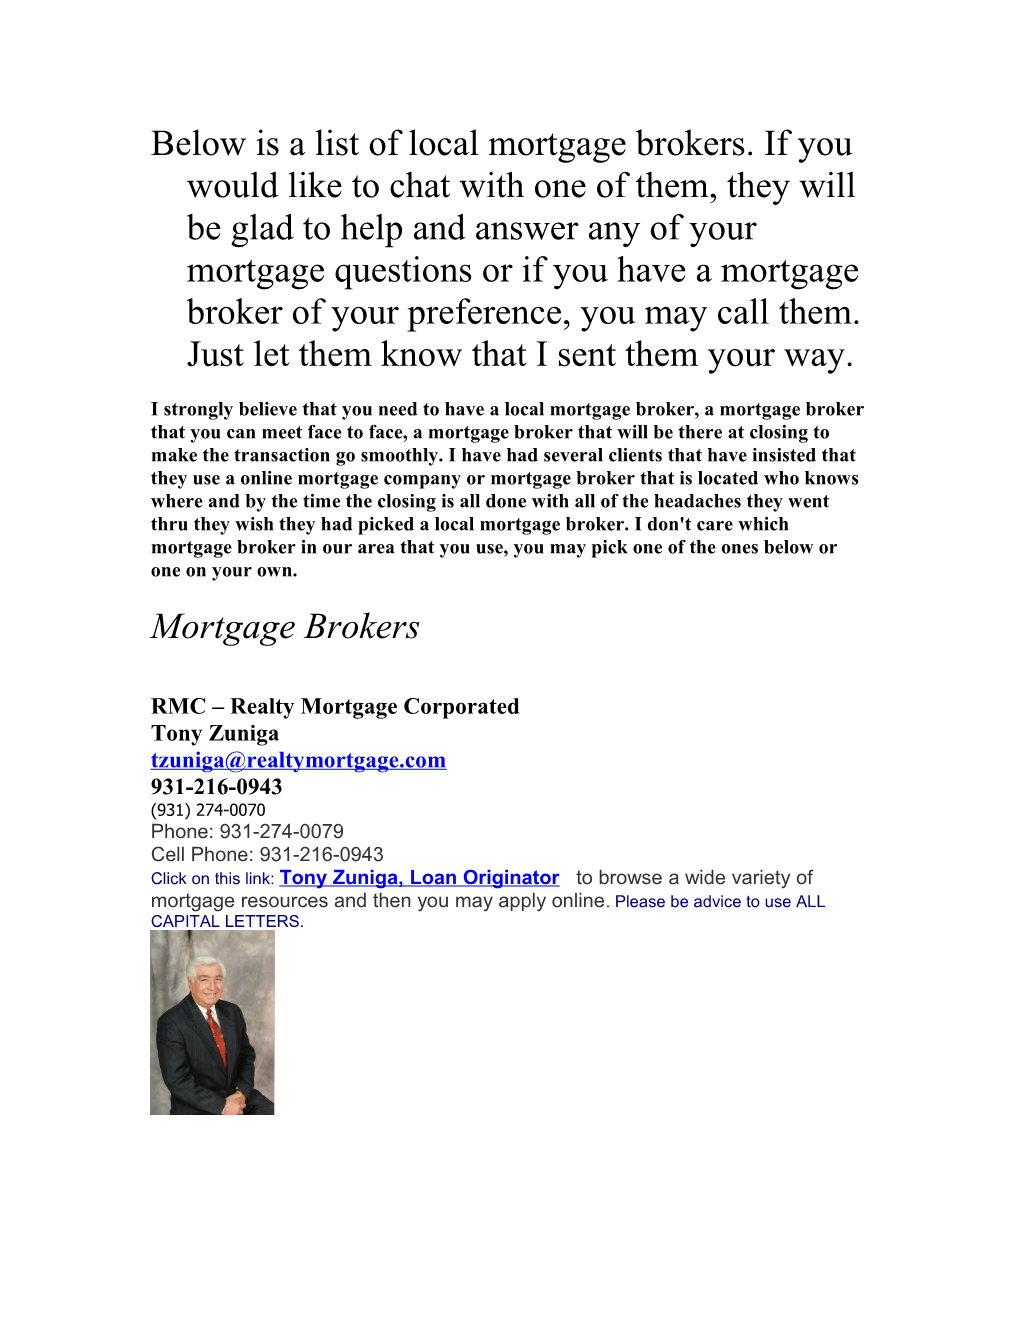 RMC Realty Mortgage Corporated